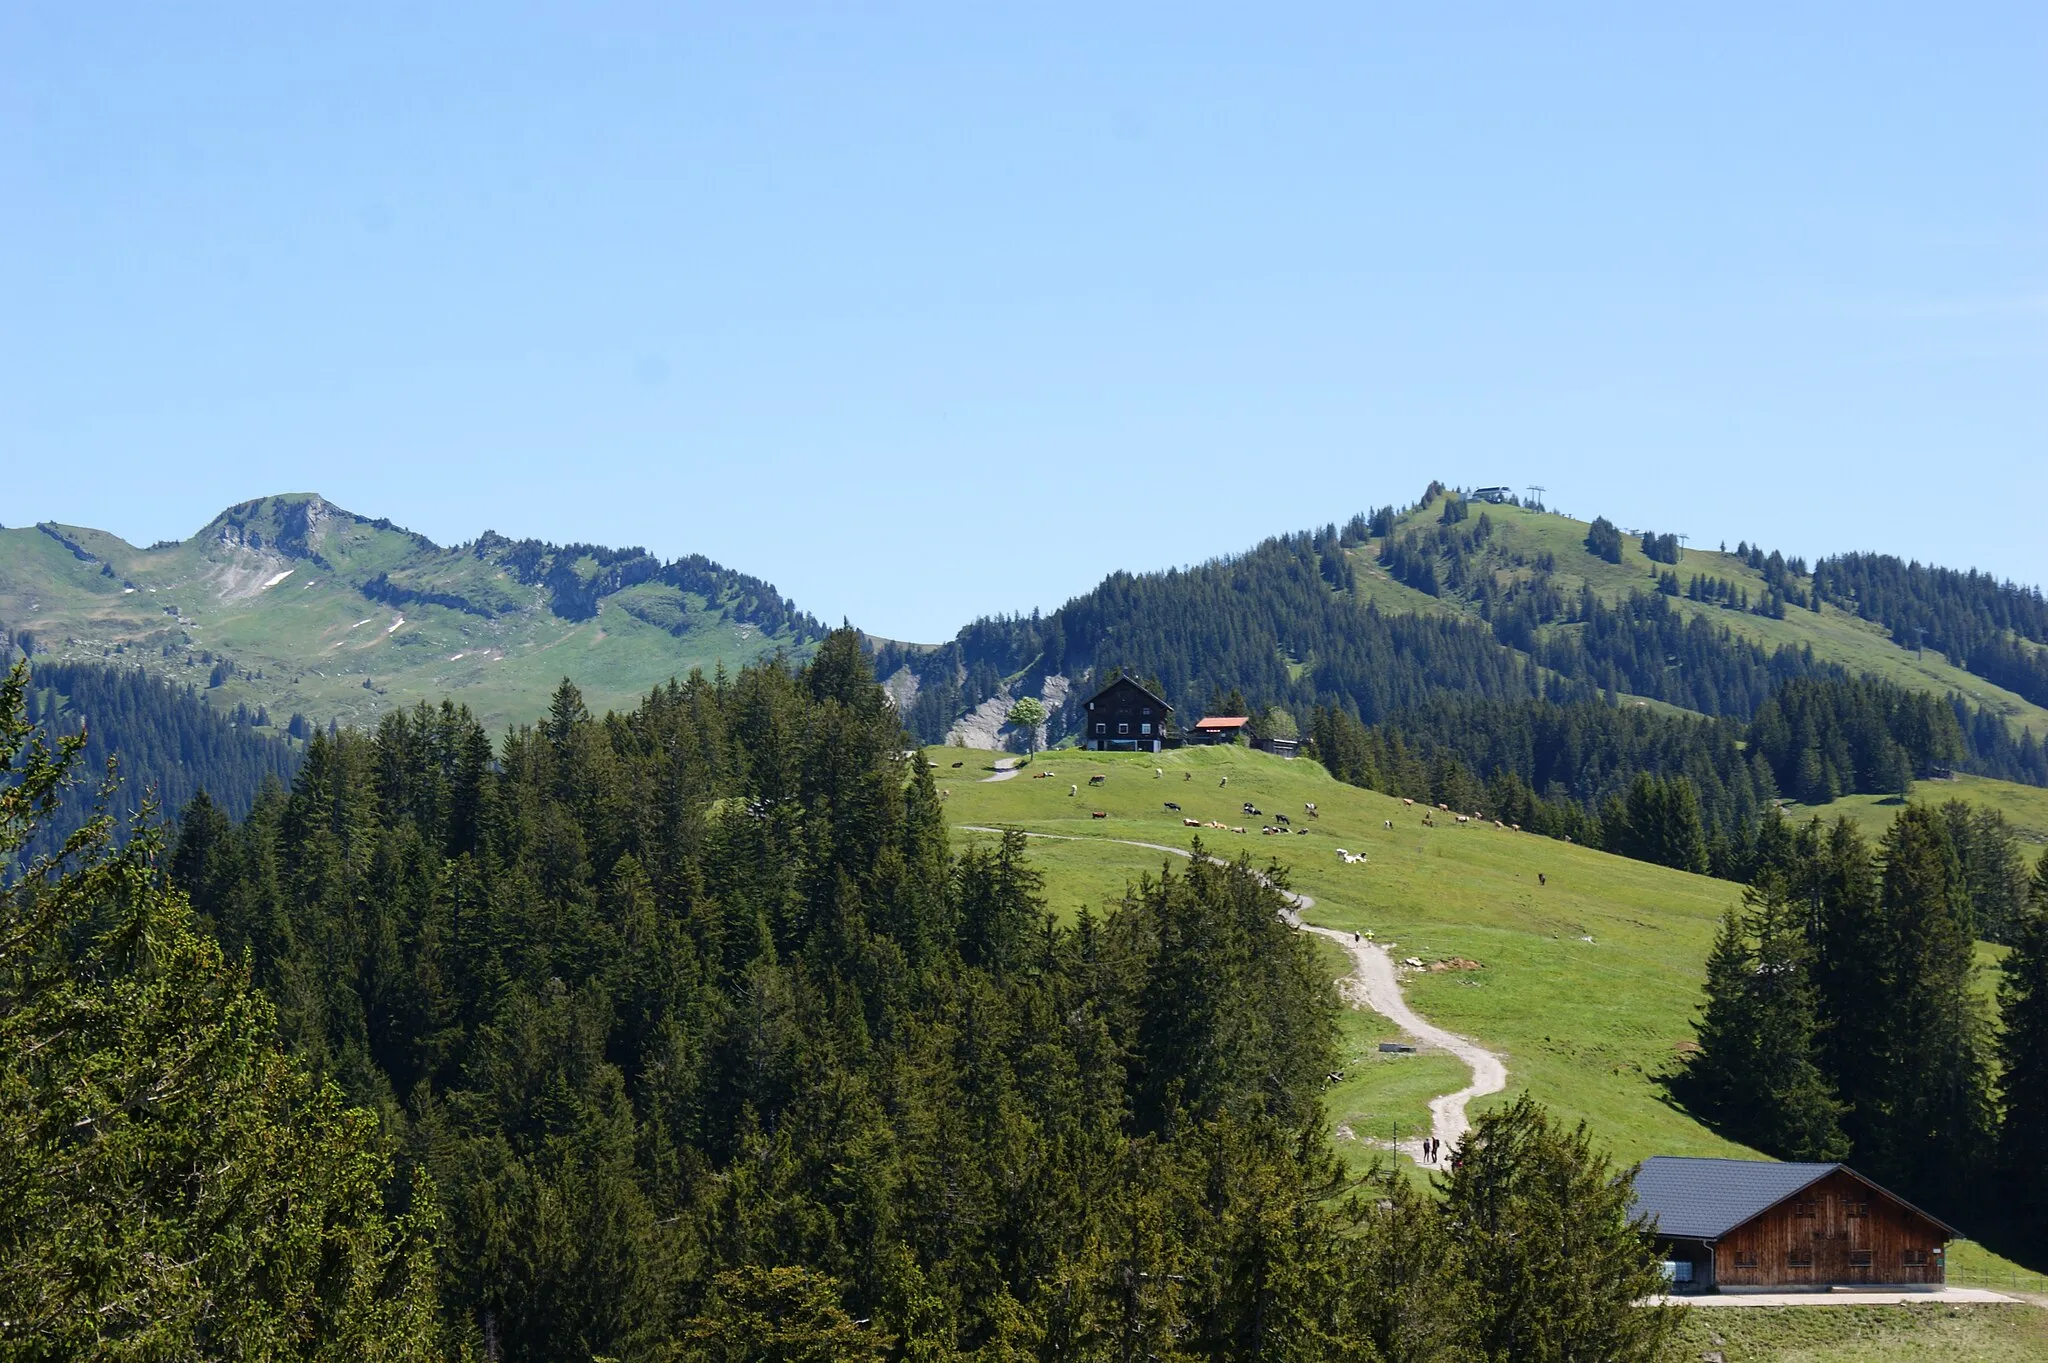 Photo showing: View to the Alp Alpweg, the Alpwegkopfhaus and the Nob 6-seater chairlift in Laterns, Vorarlberg, Austria.